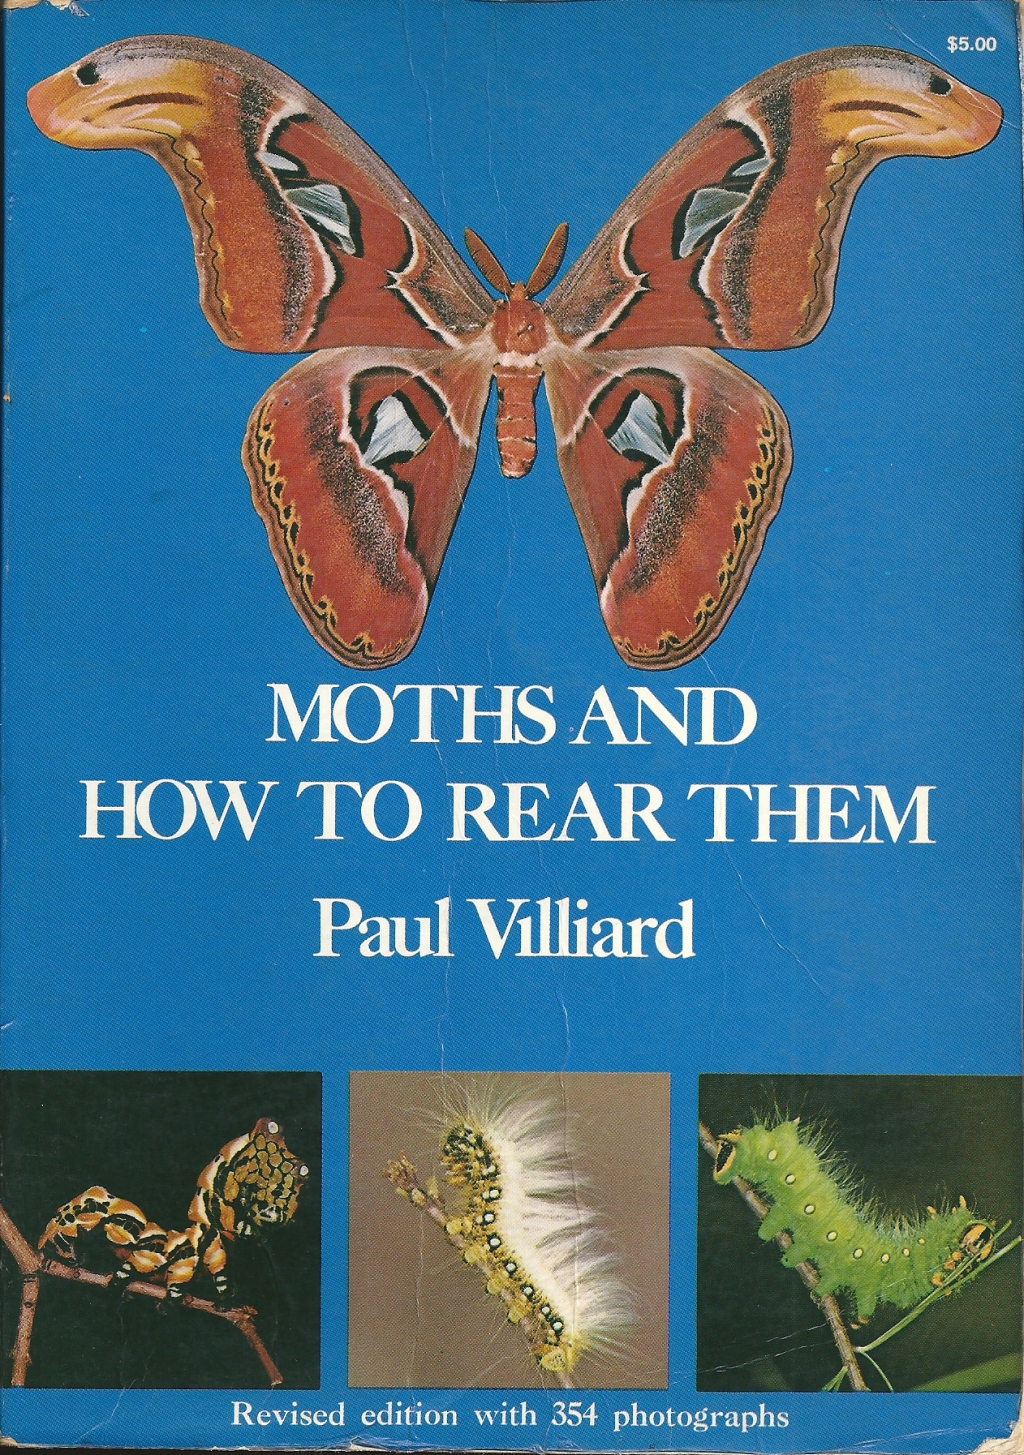 BOOK REVIEW: “Moths And How To Rear Them” by Paul Villiard